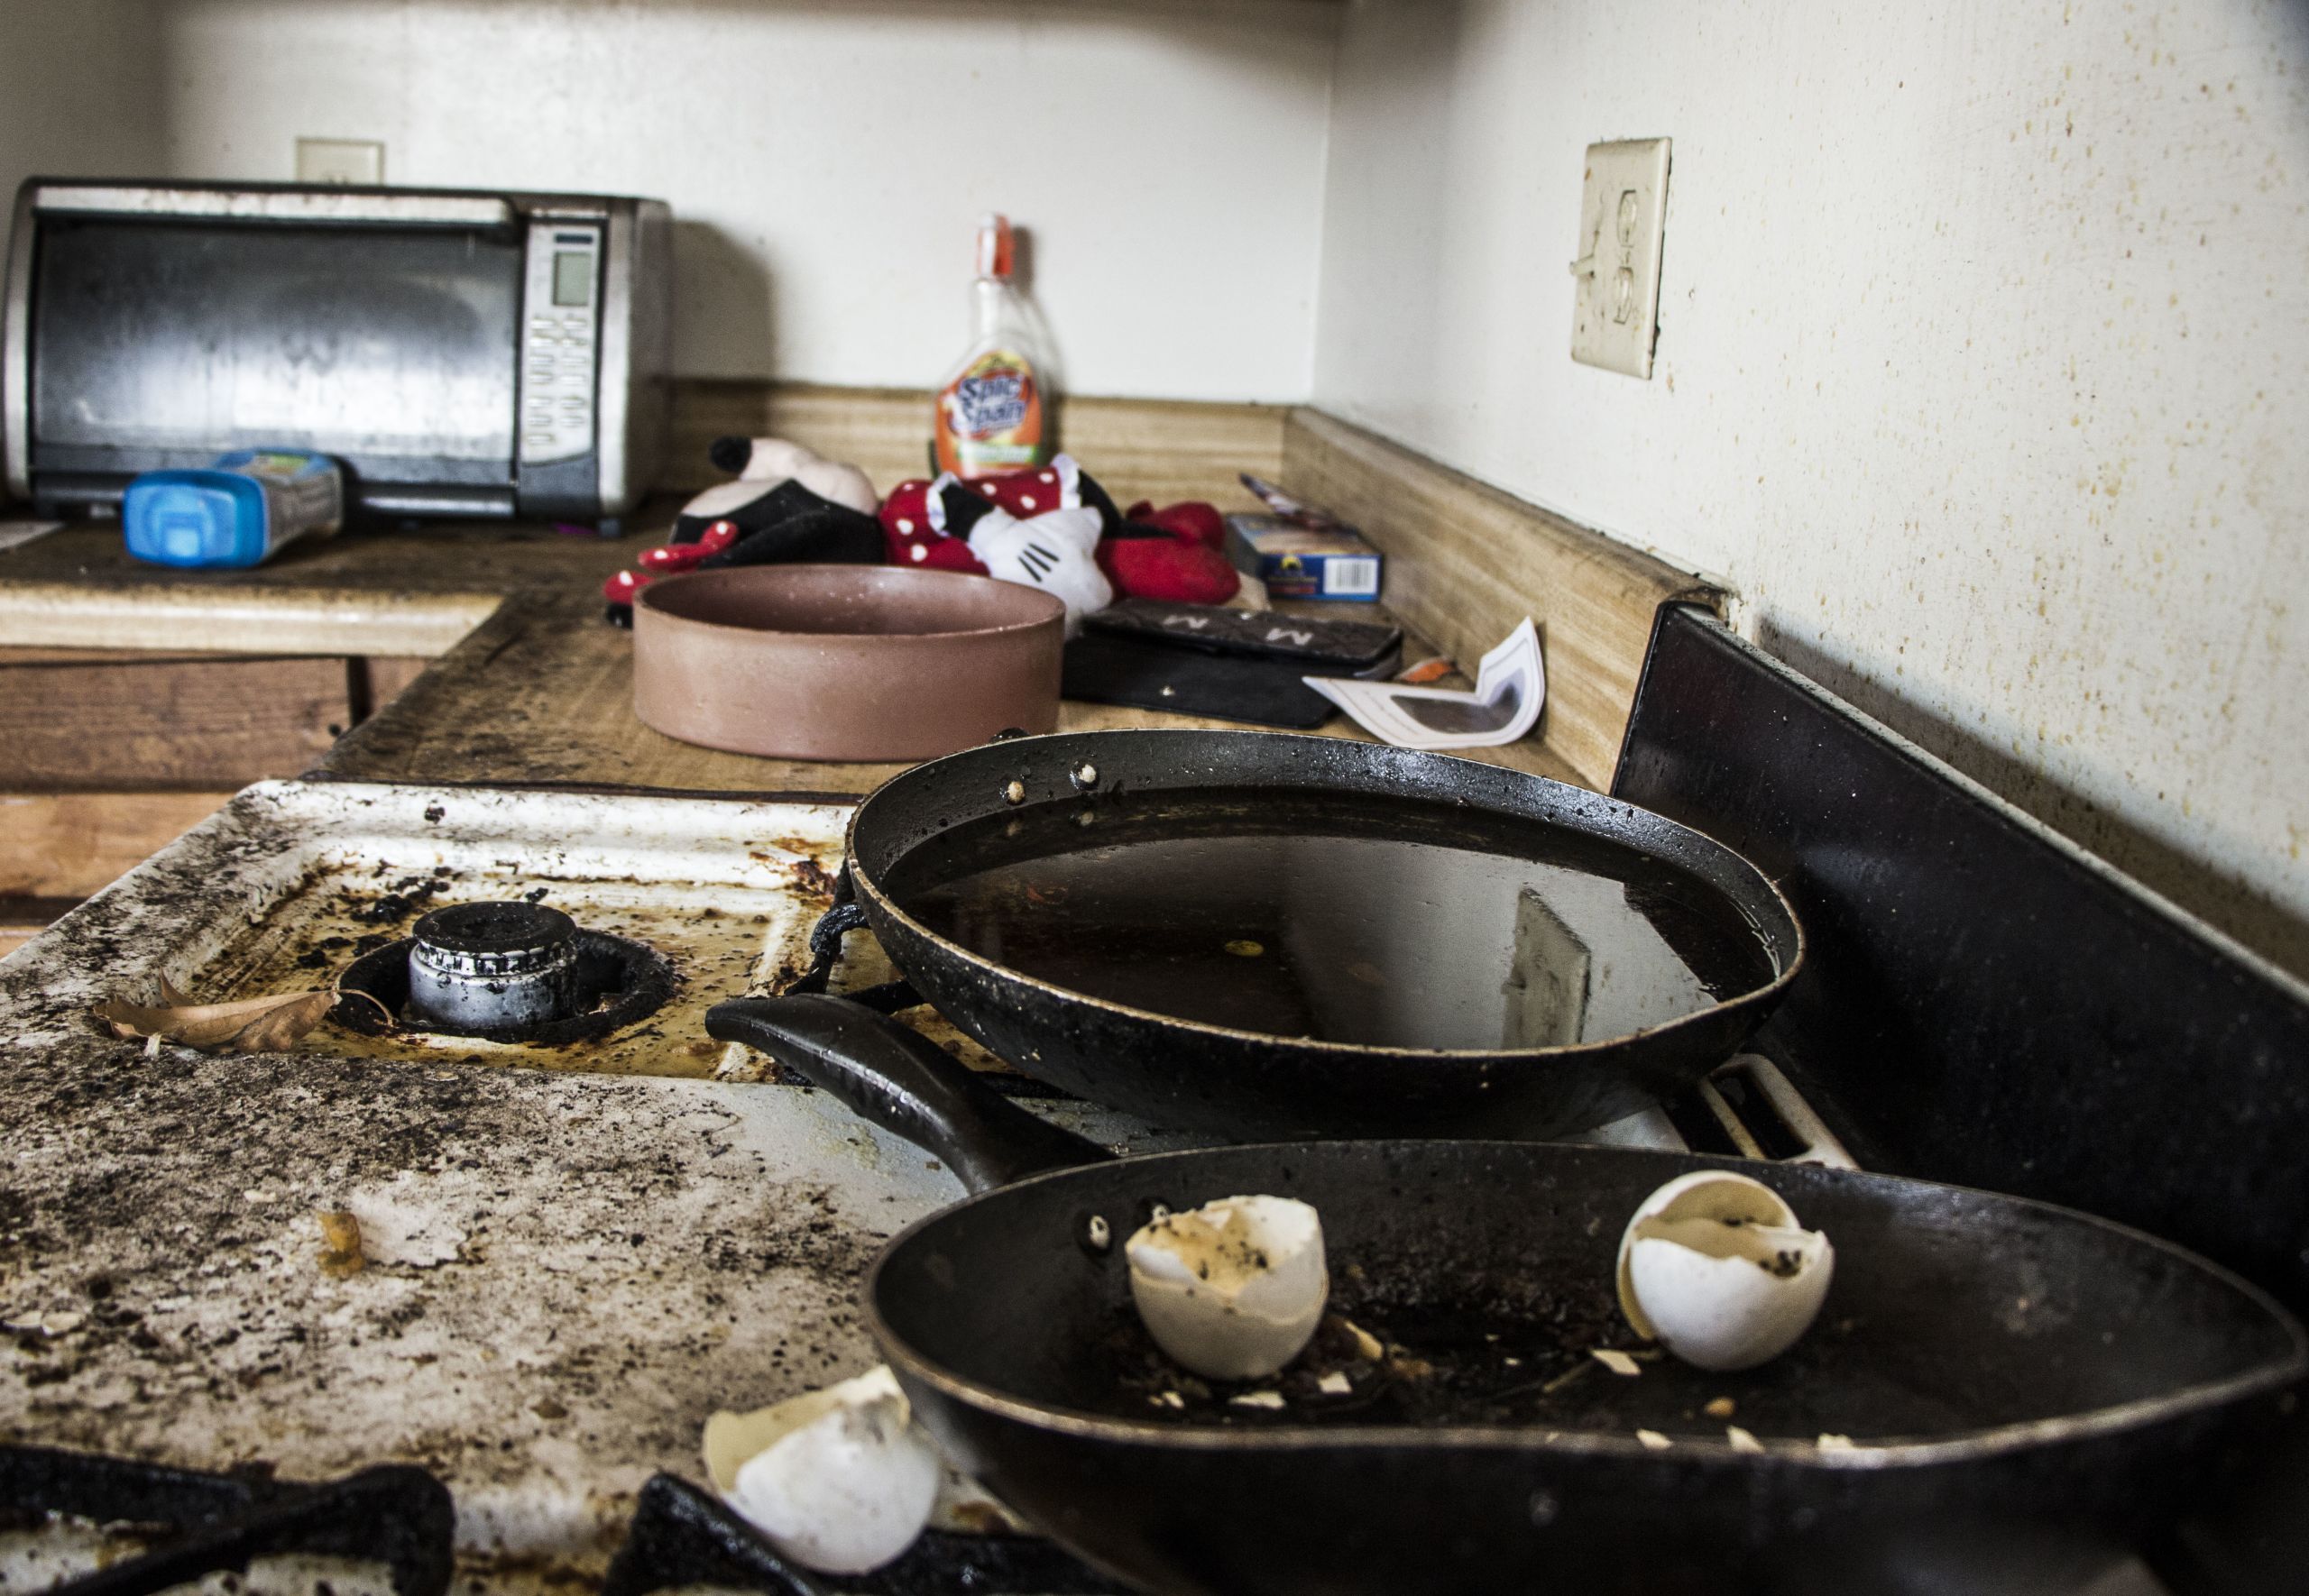 In 2016, 1,100 residents of the West Calumet Housing Complex were forced to move out. Remnants of resident life still remain in one of the units. (WBEZ/Rowan Lynam)